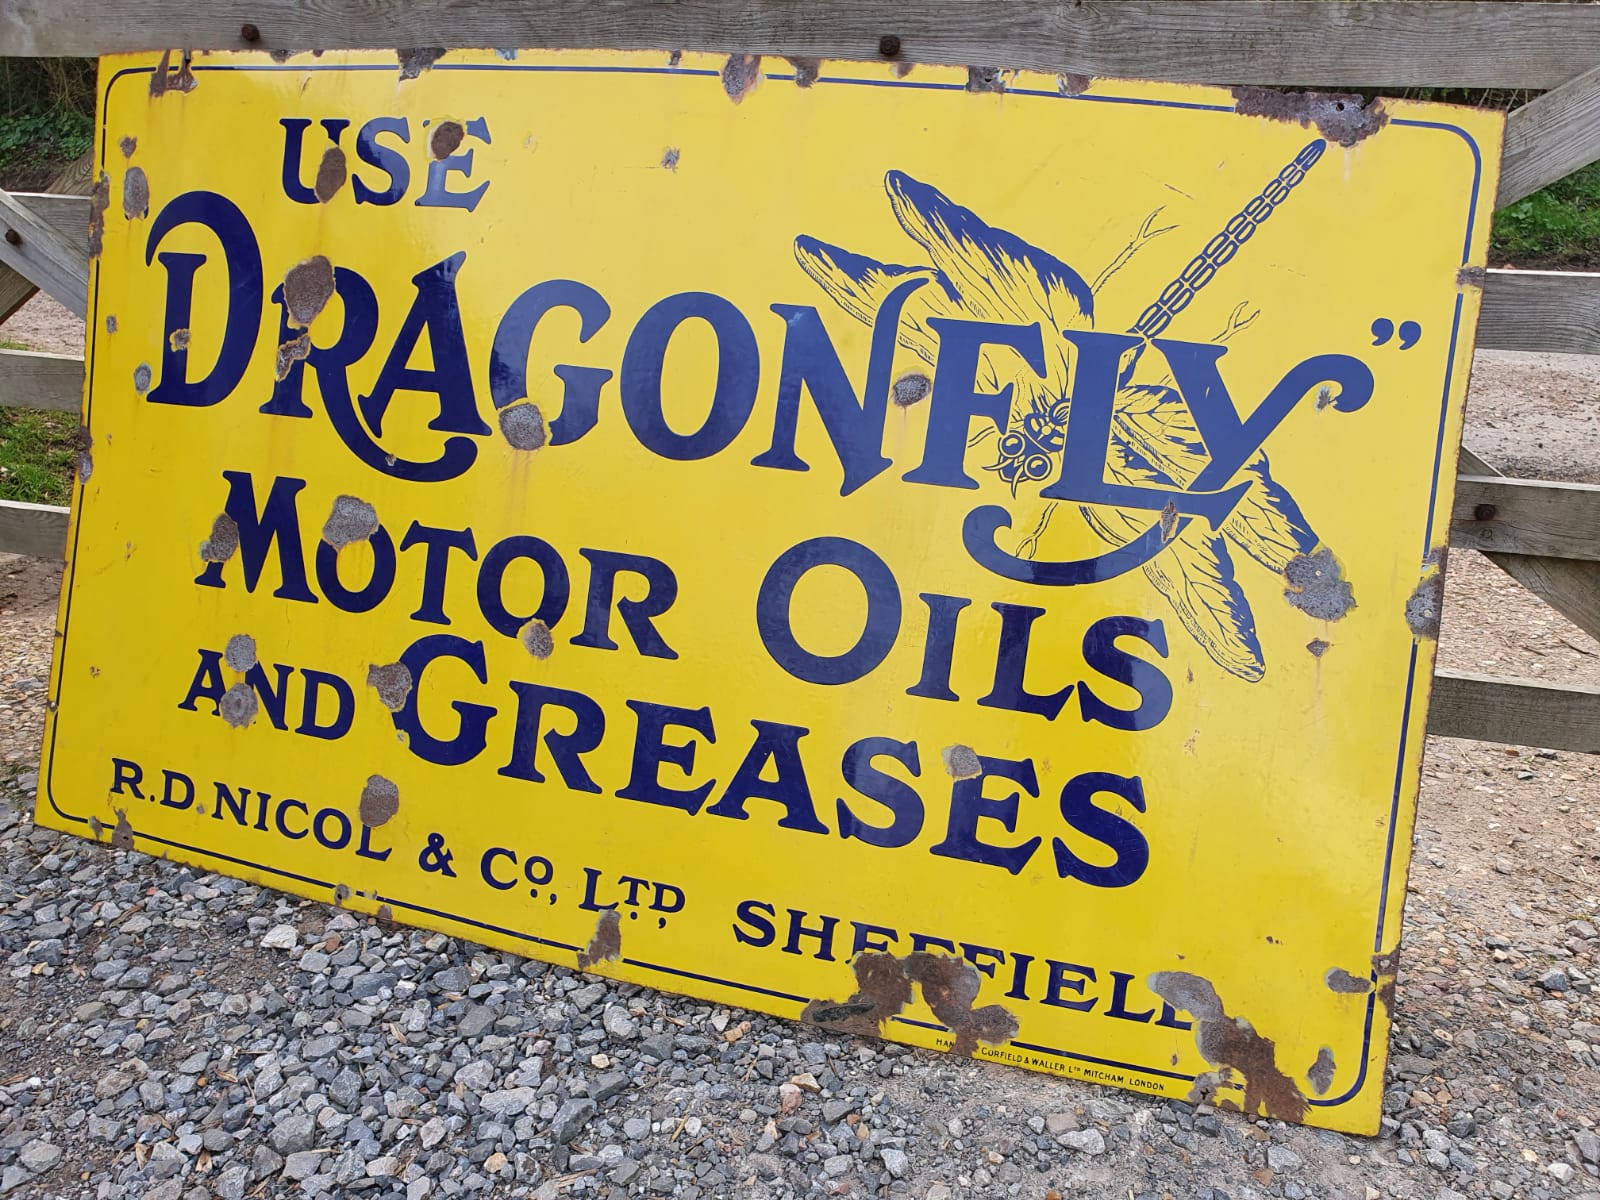 Dragonfly Motor Oil - Now Sold! - Vintage Automobilia